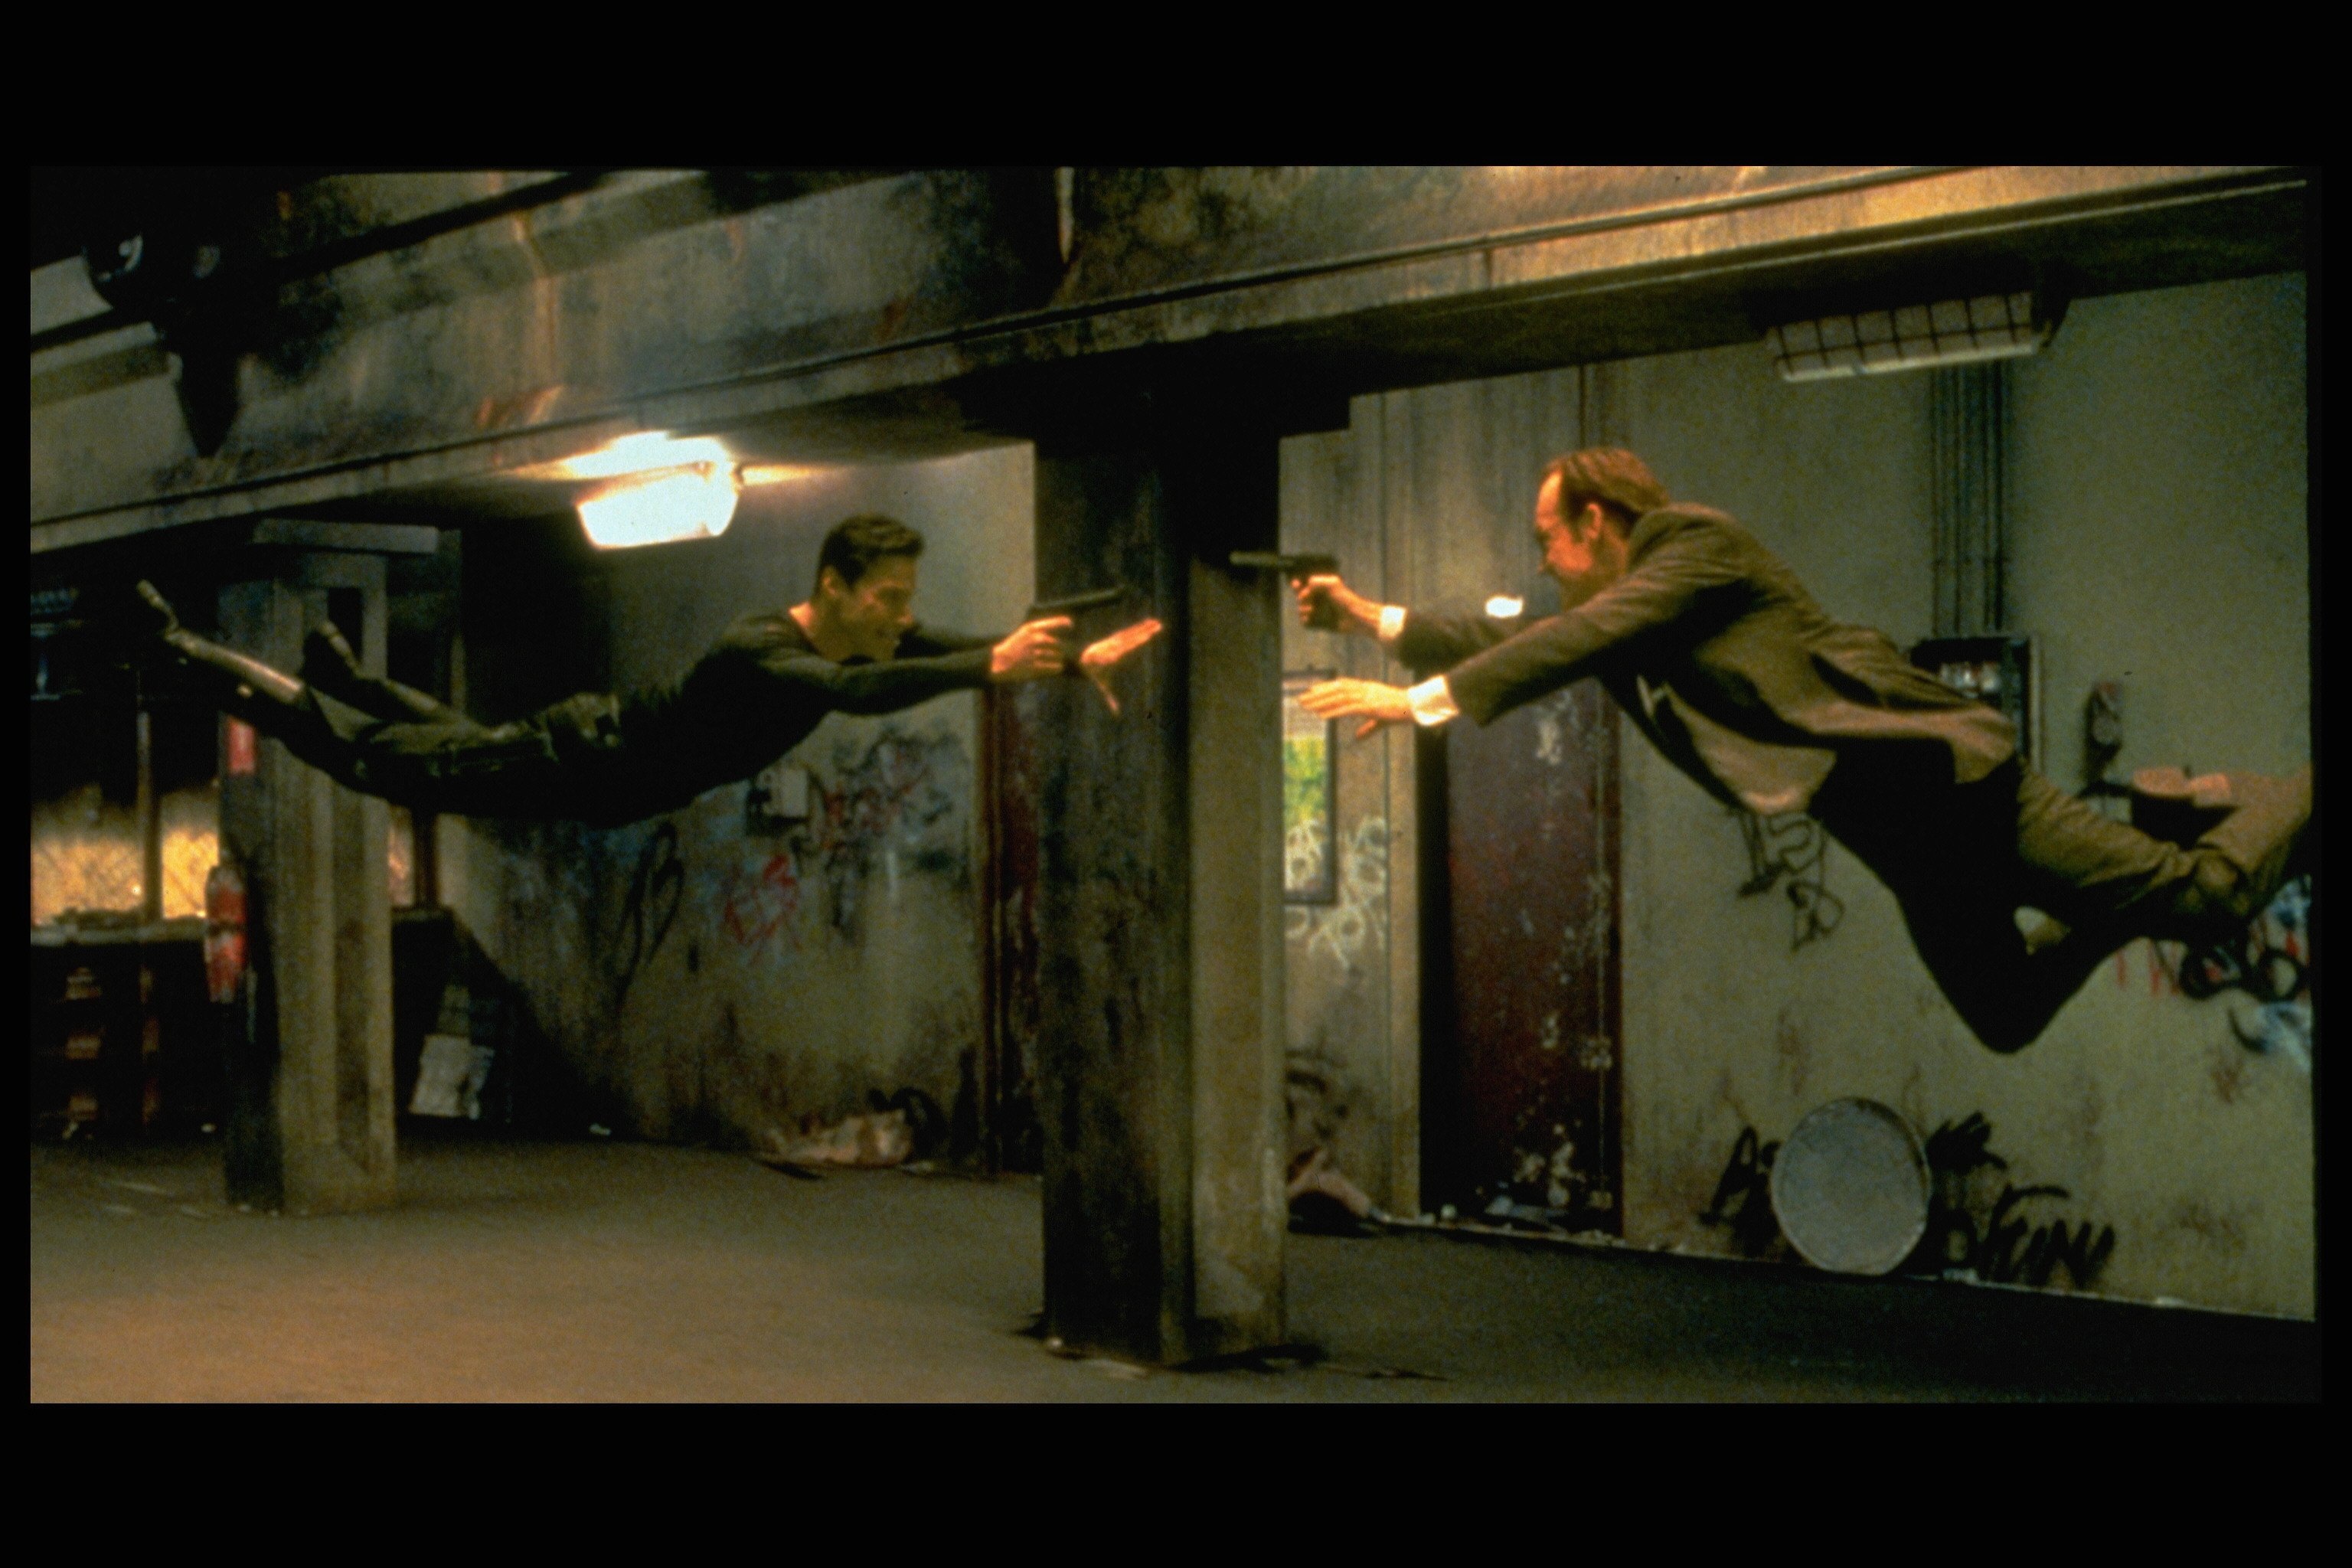 The Matrix: Keanu Reeves and Hugo Weaving shoot at each other